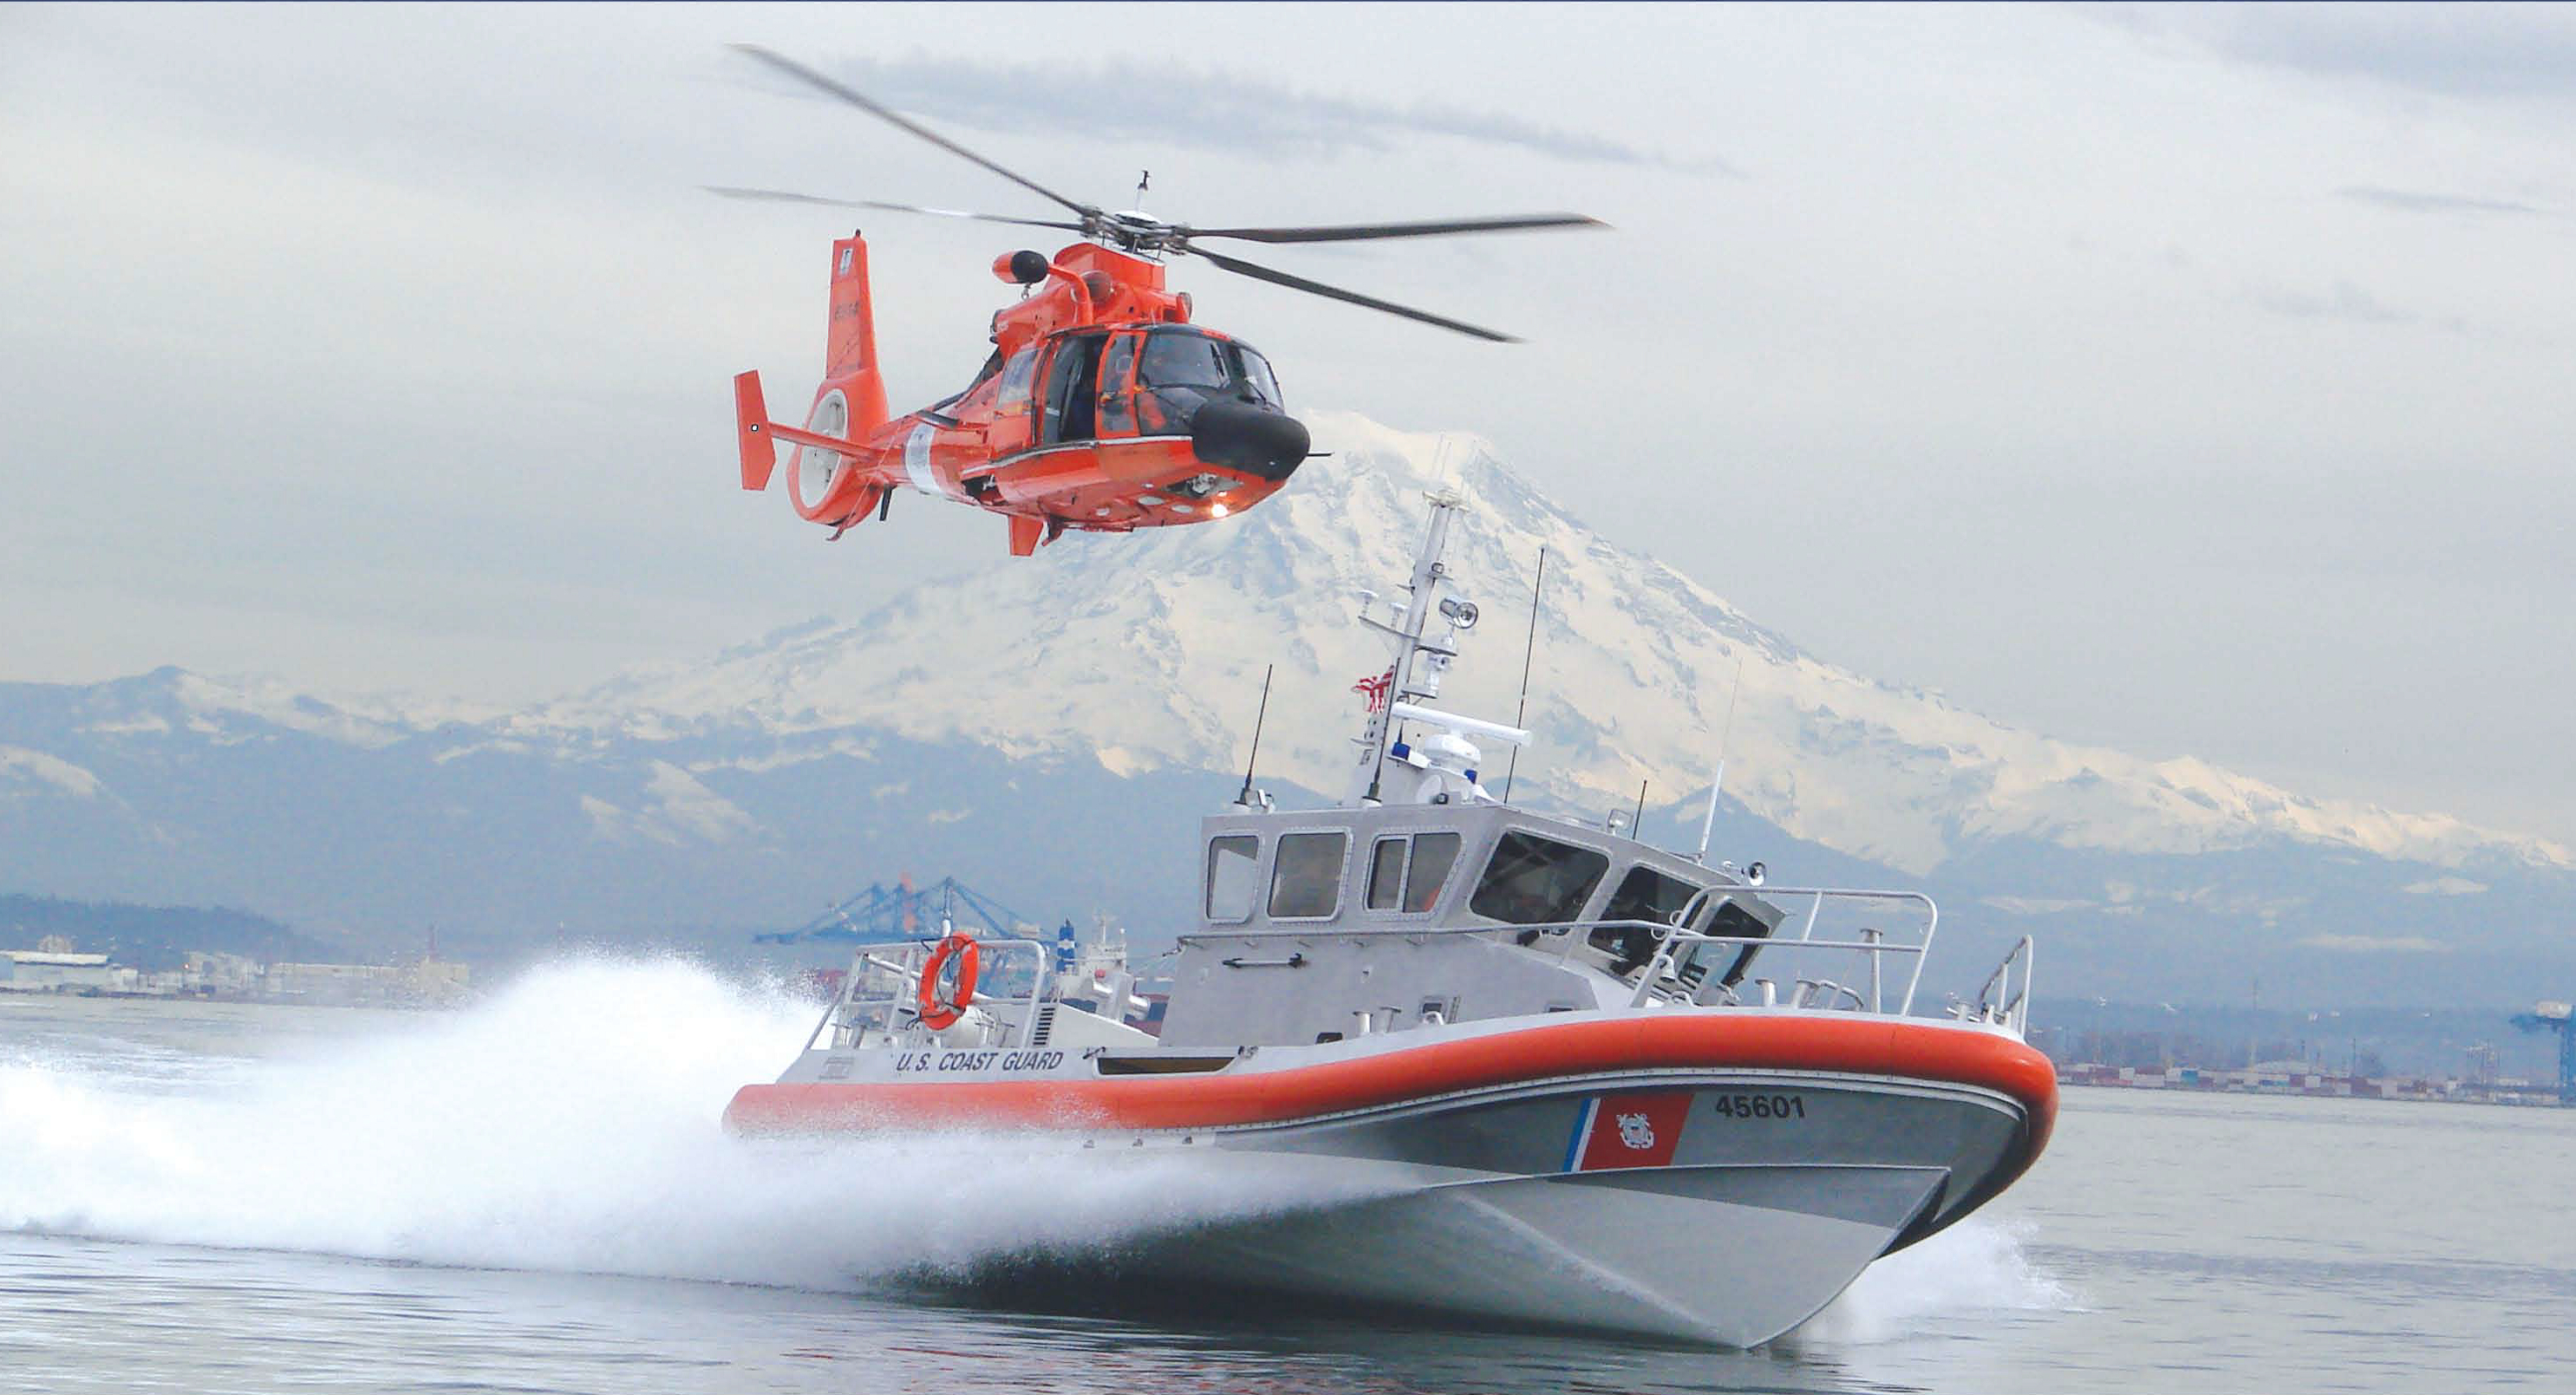 2971x1609 Solutions-Based Engineering Leads to Successful Mass Production of USCG Boats